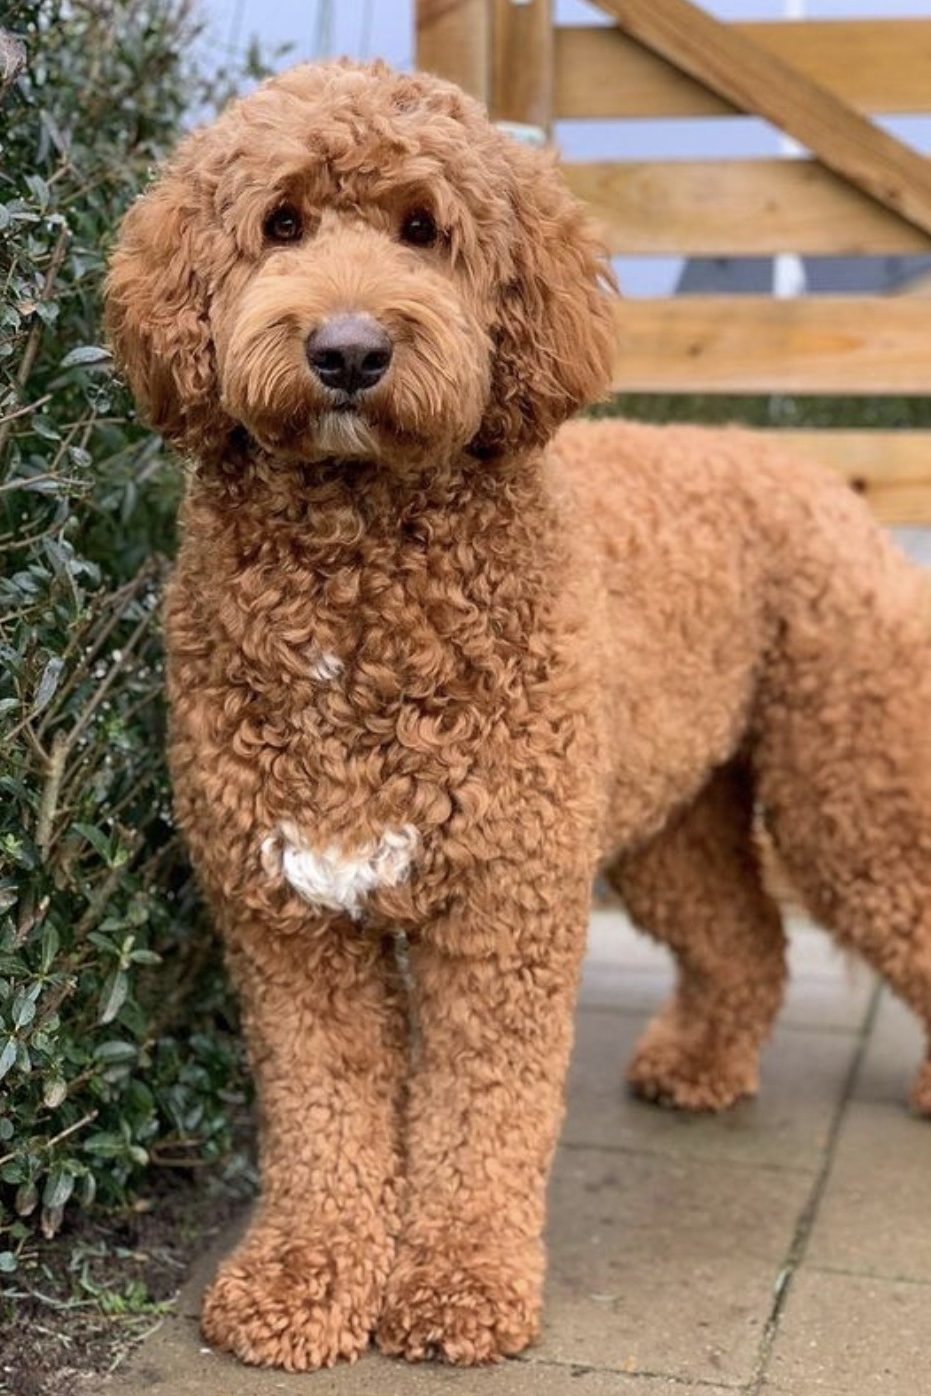 How Much Are F1b Goldendoodles?